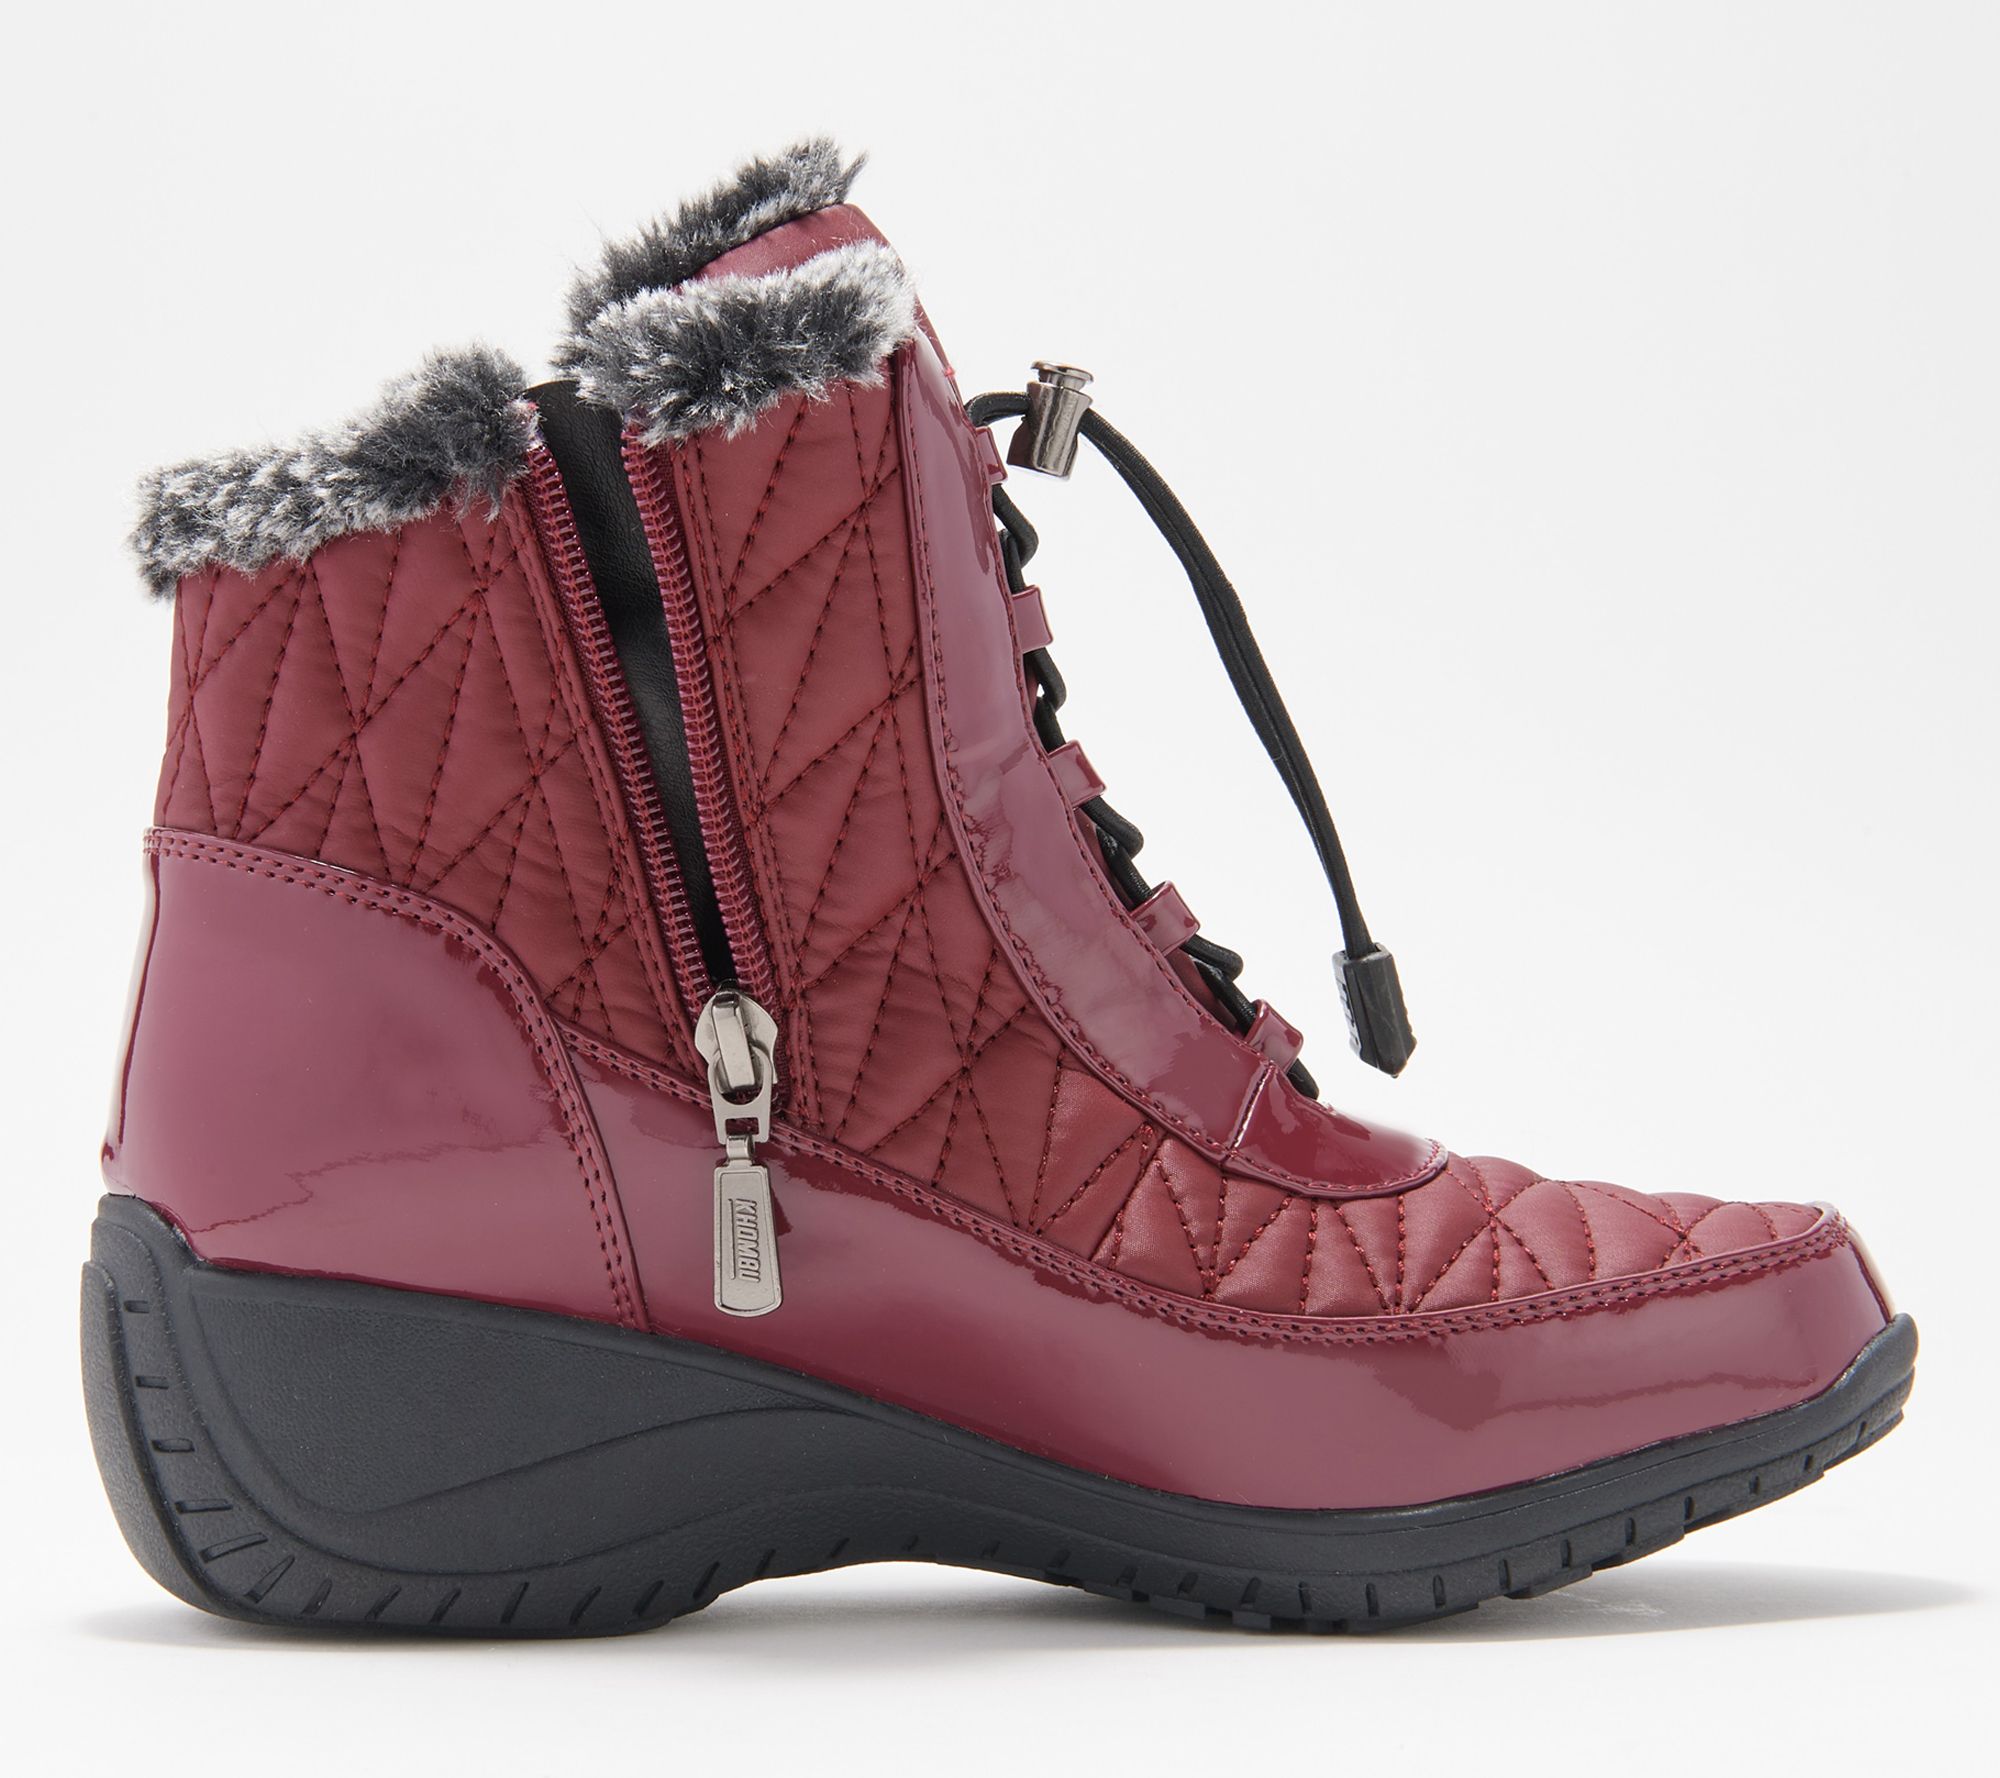  Boojoy Winter Boots, Womens Winter Snow Boots Waterproof  Anti-Slip Booties (Red,8-8.5) : Clothing, Shoes & Jewelry